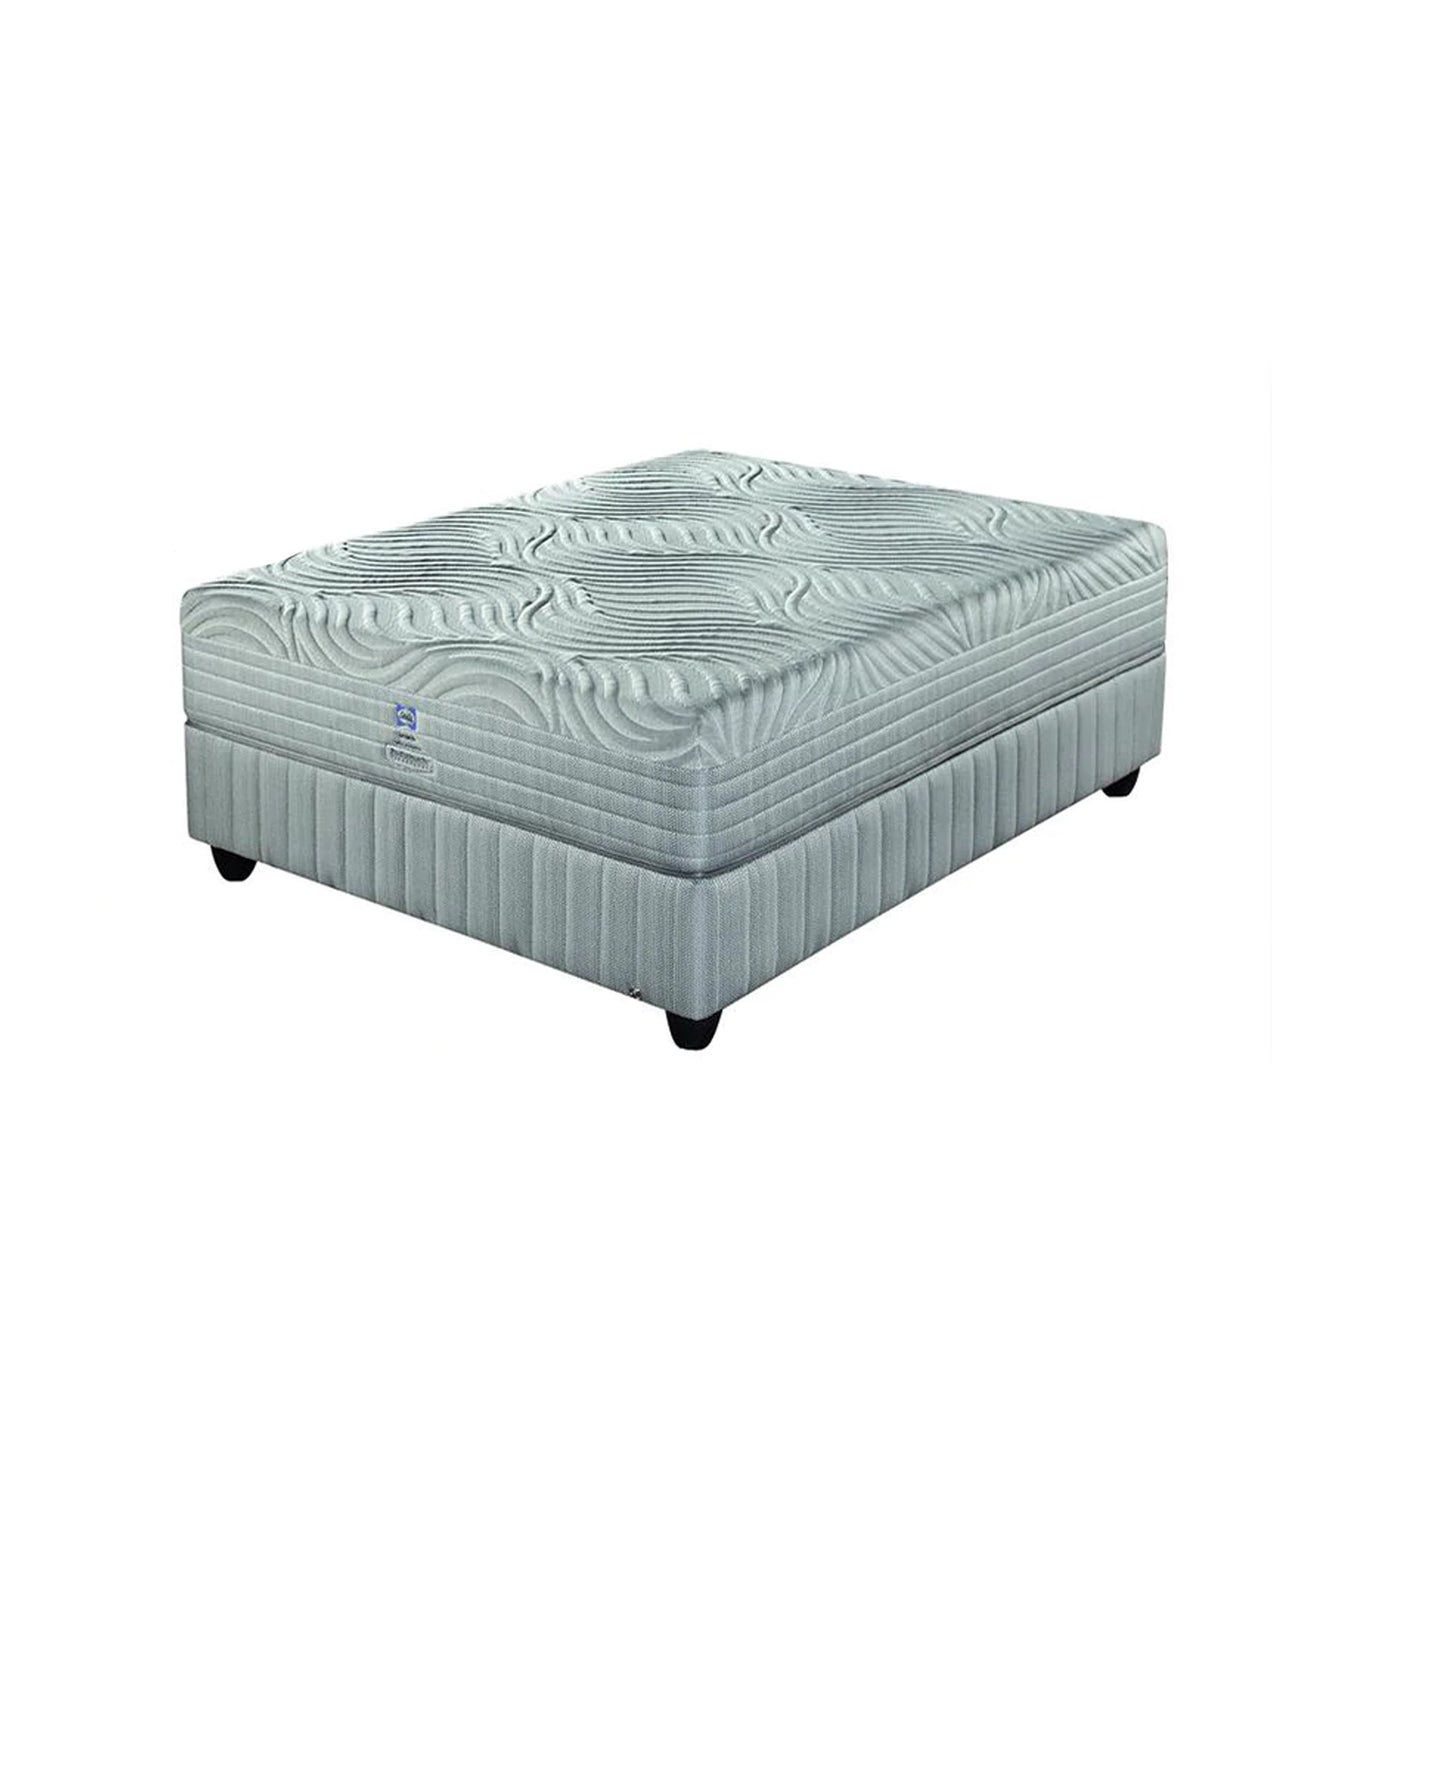 Sealy Posturepedic Solay Firm Bed